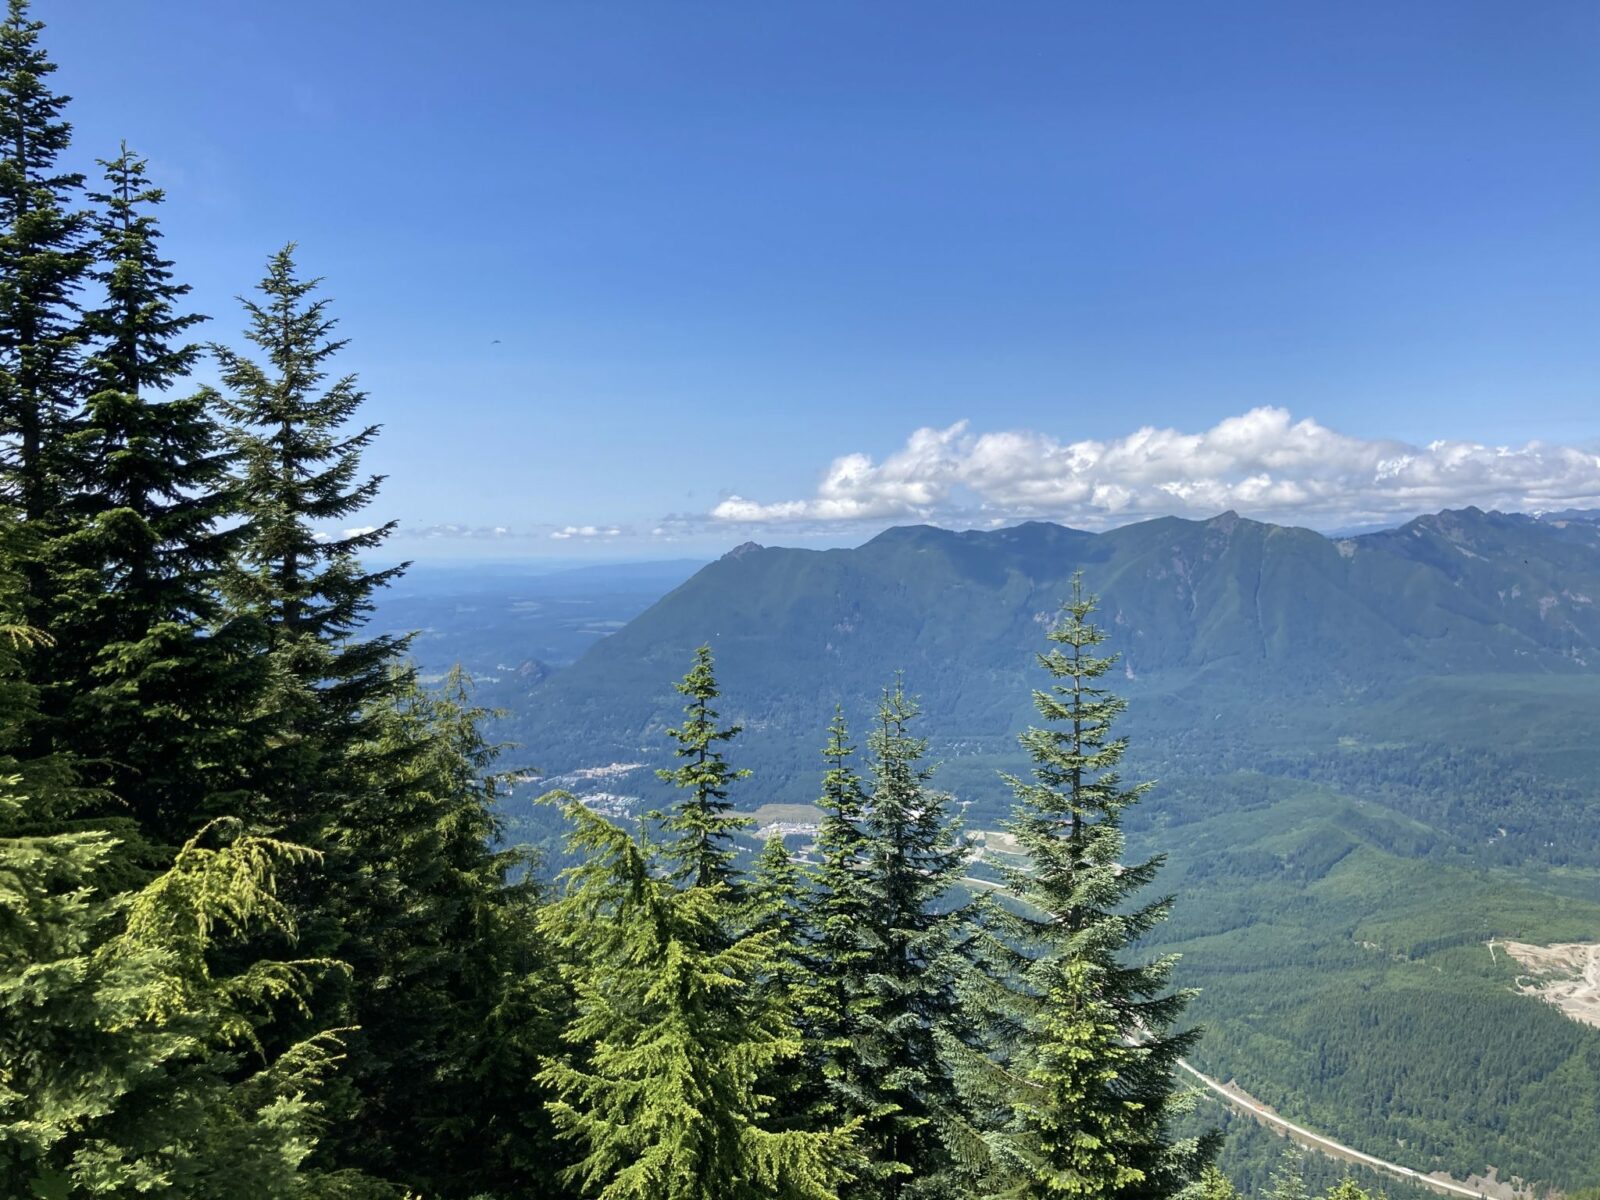 Mt Si and other peaks are seen across the valley of North Bend from the Mt Washington summit